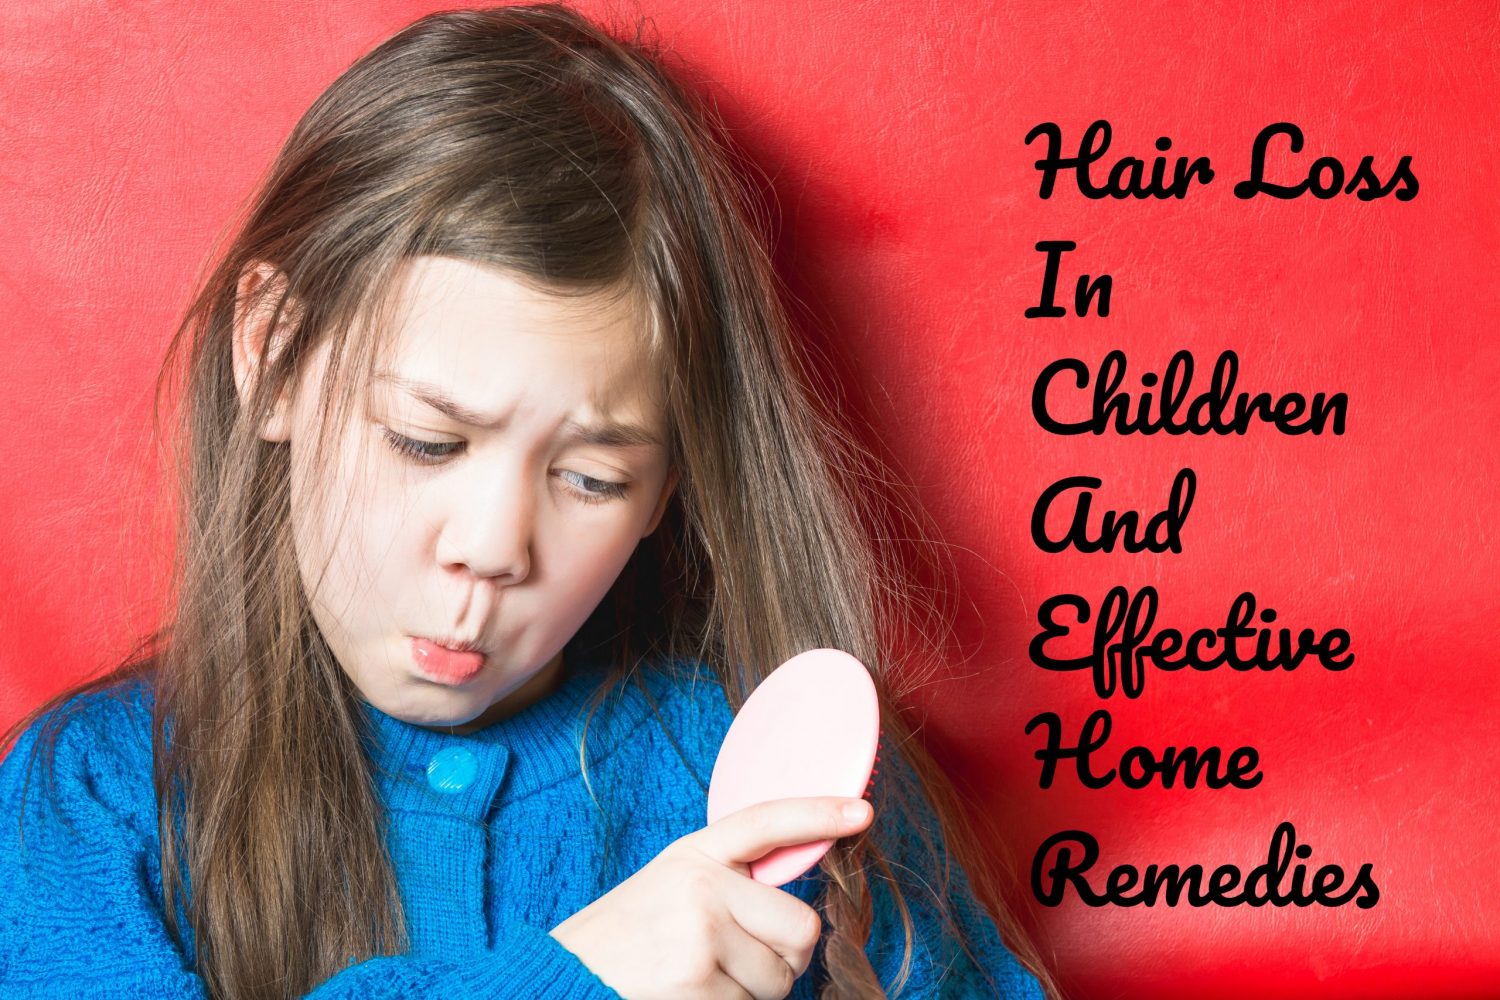 Hair Loss In Children And Effective Home Remedies - Being The Parent